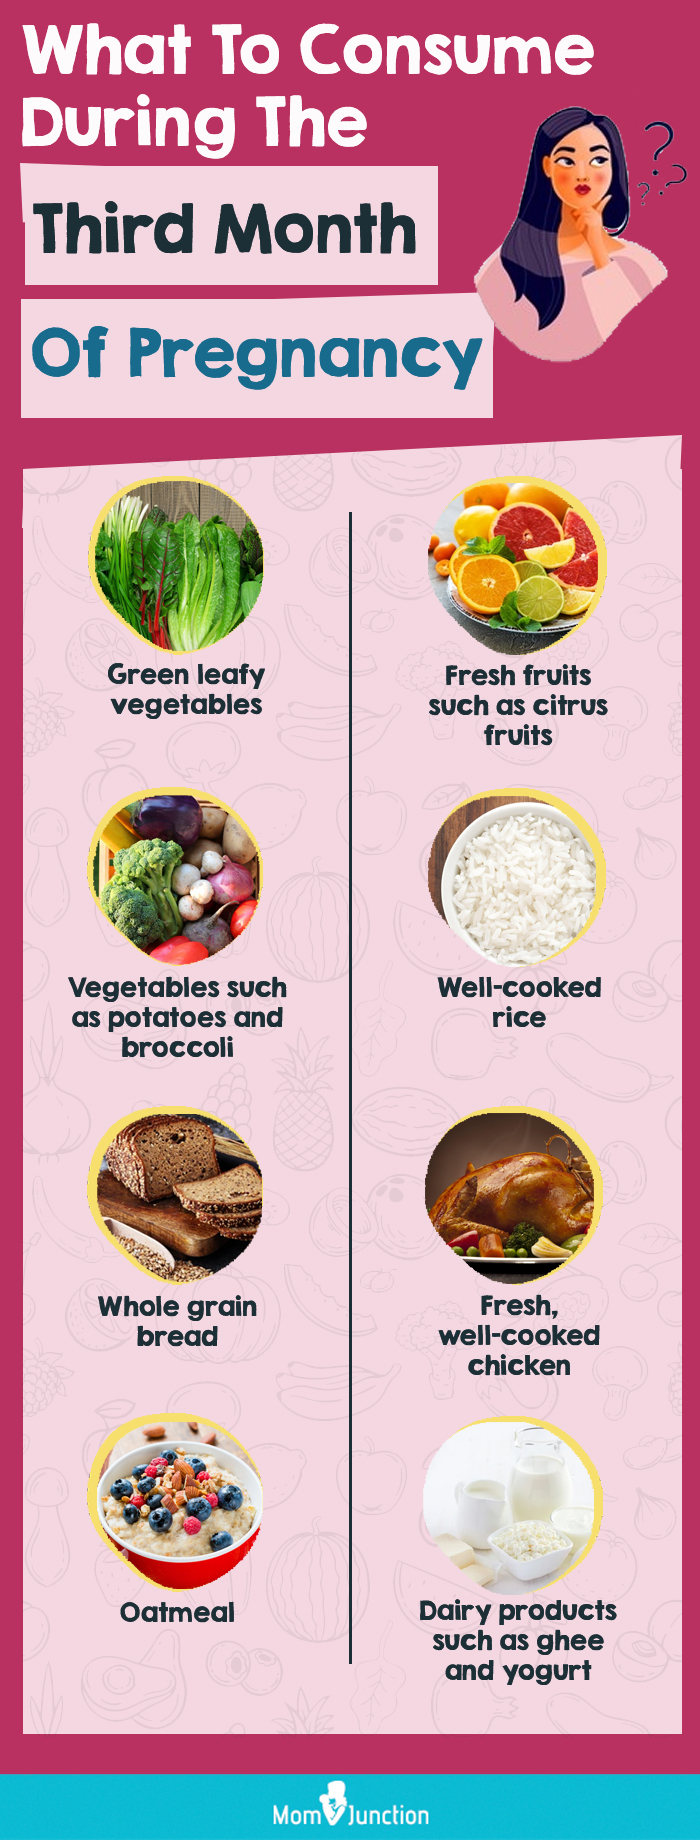 https://cdn2.momjunction.com/wp-content/uploads/2014/04/Infographic-Foods-To-Eat-In-The-3rd-Month-Of-Pregnancy.jpg